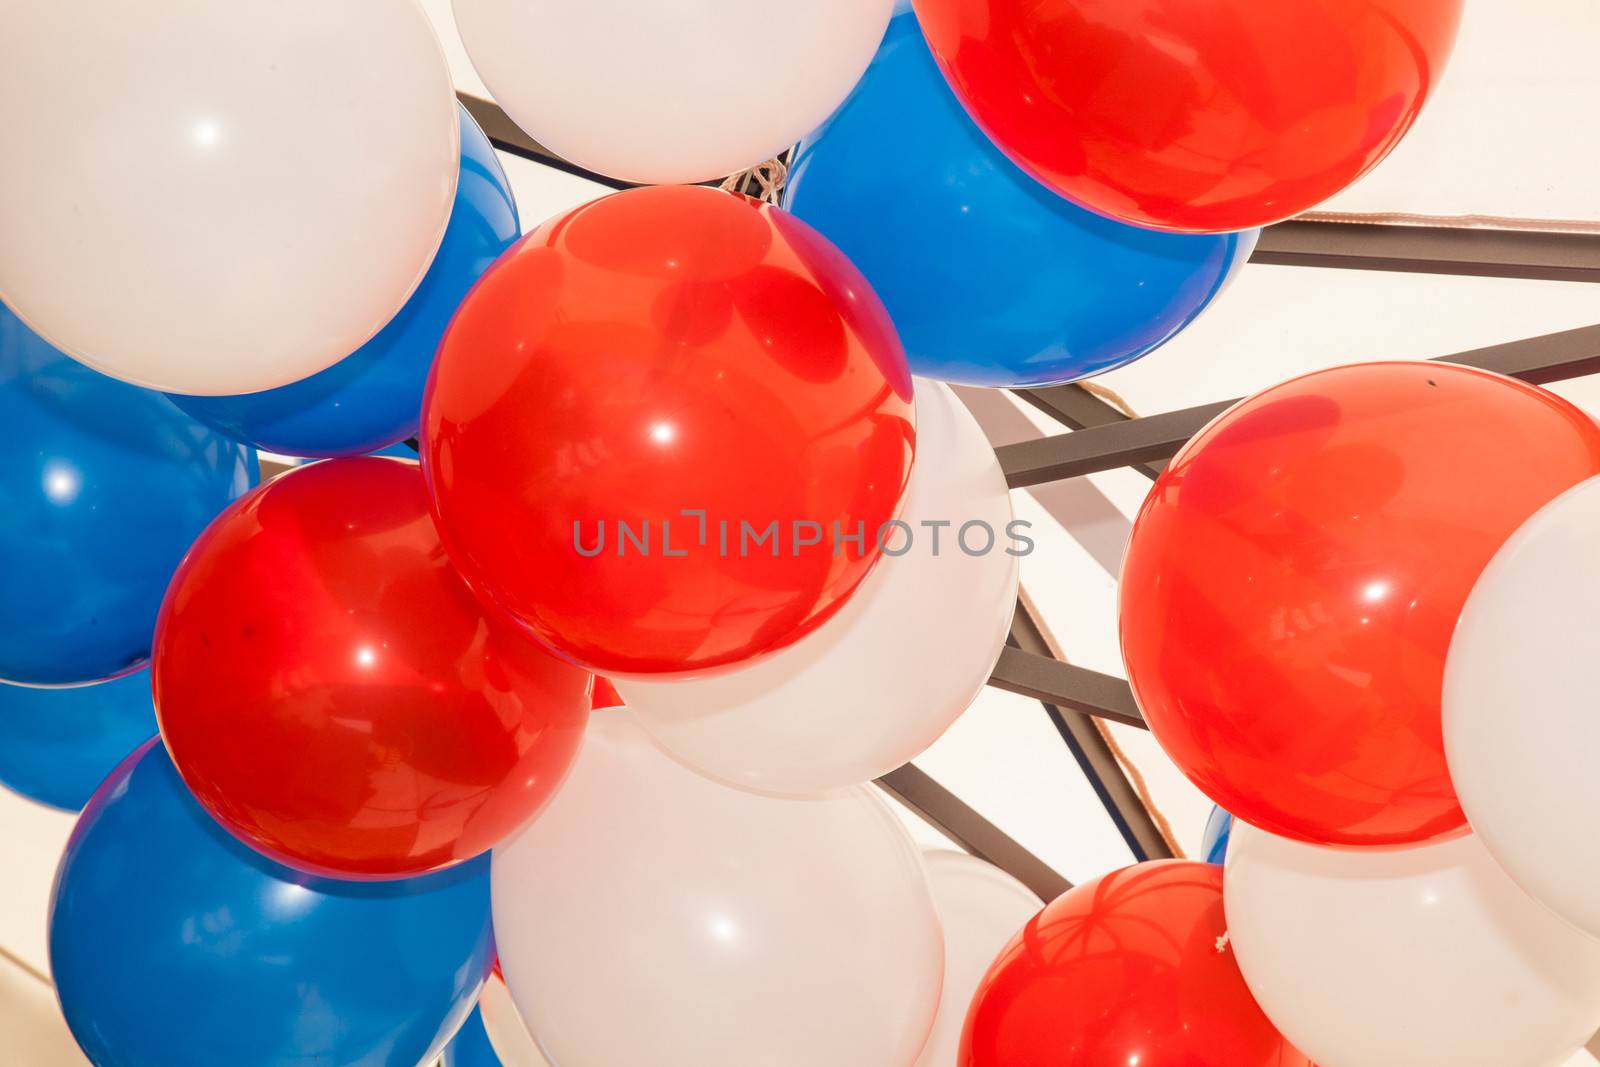 Blue White And Red Balloon decorations at party.